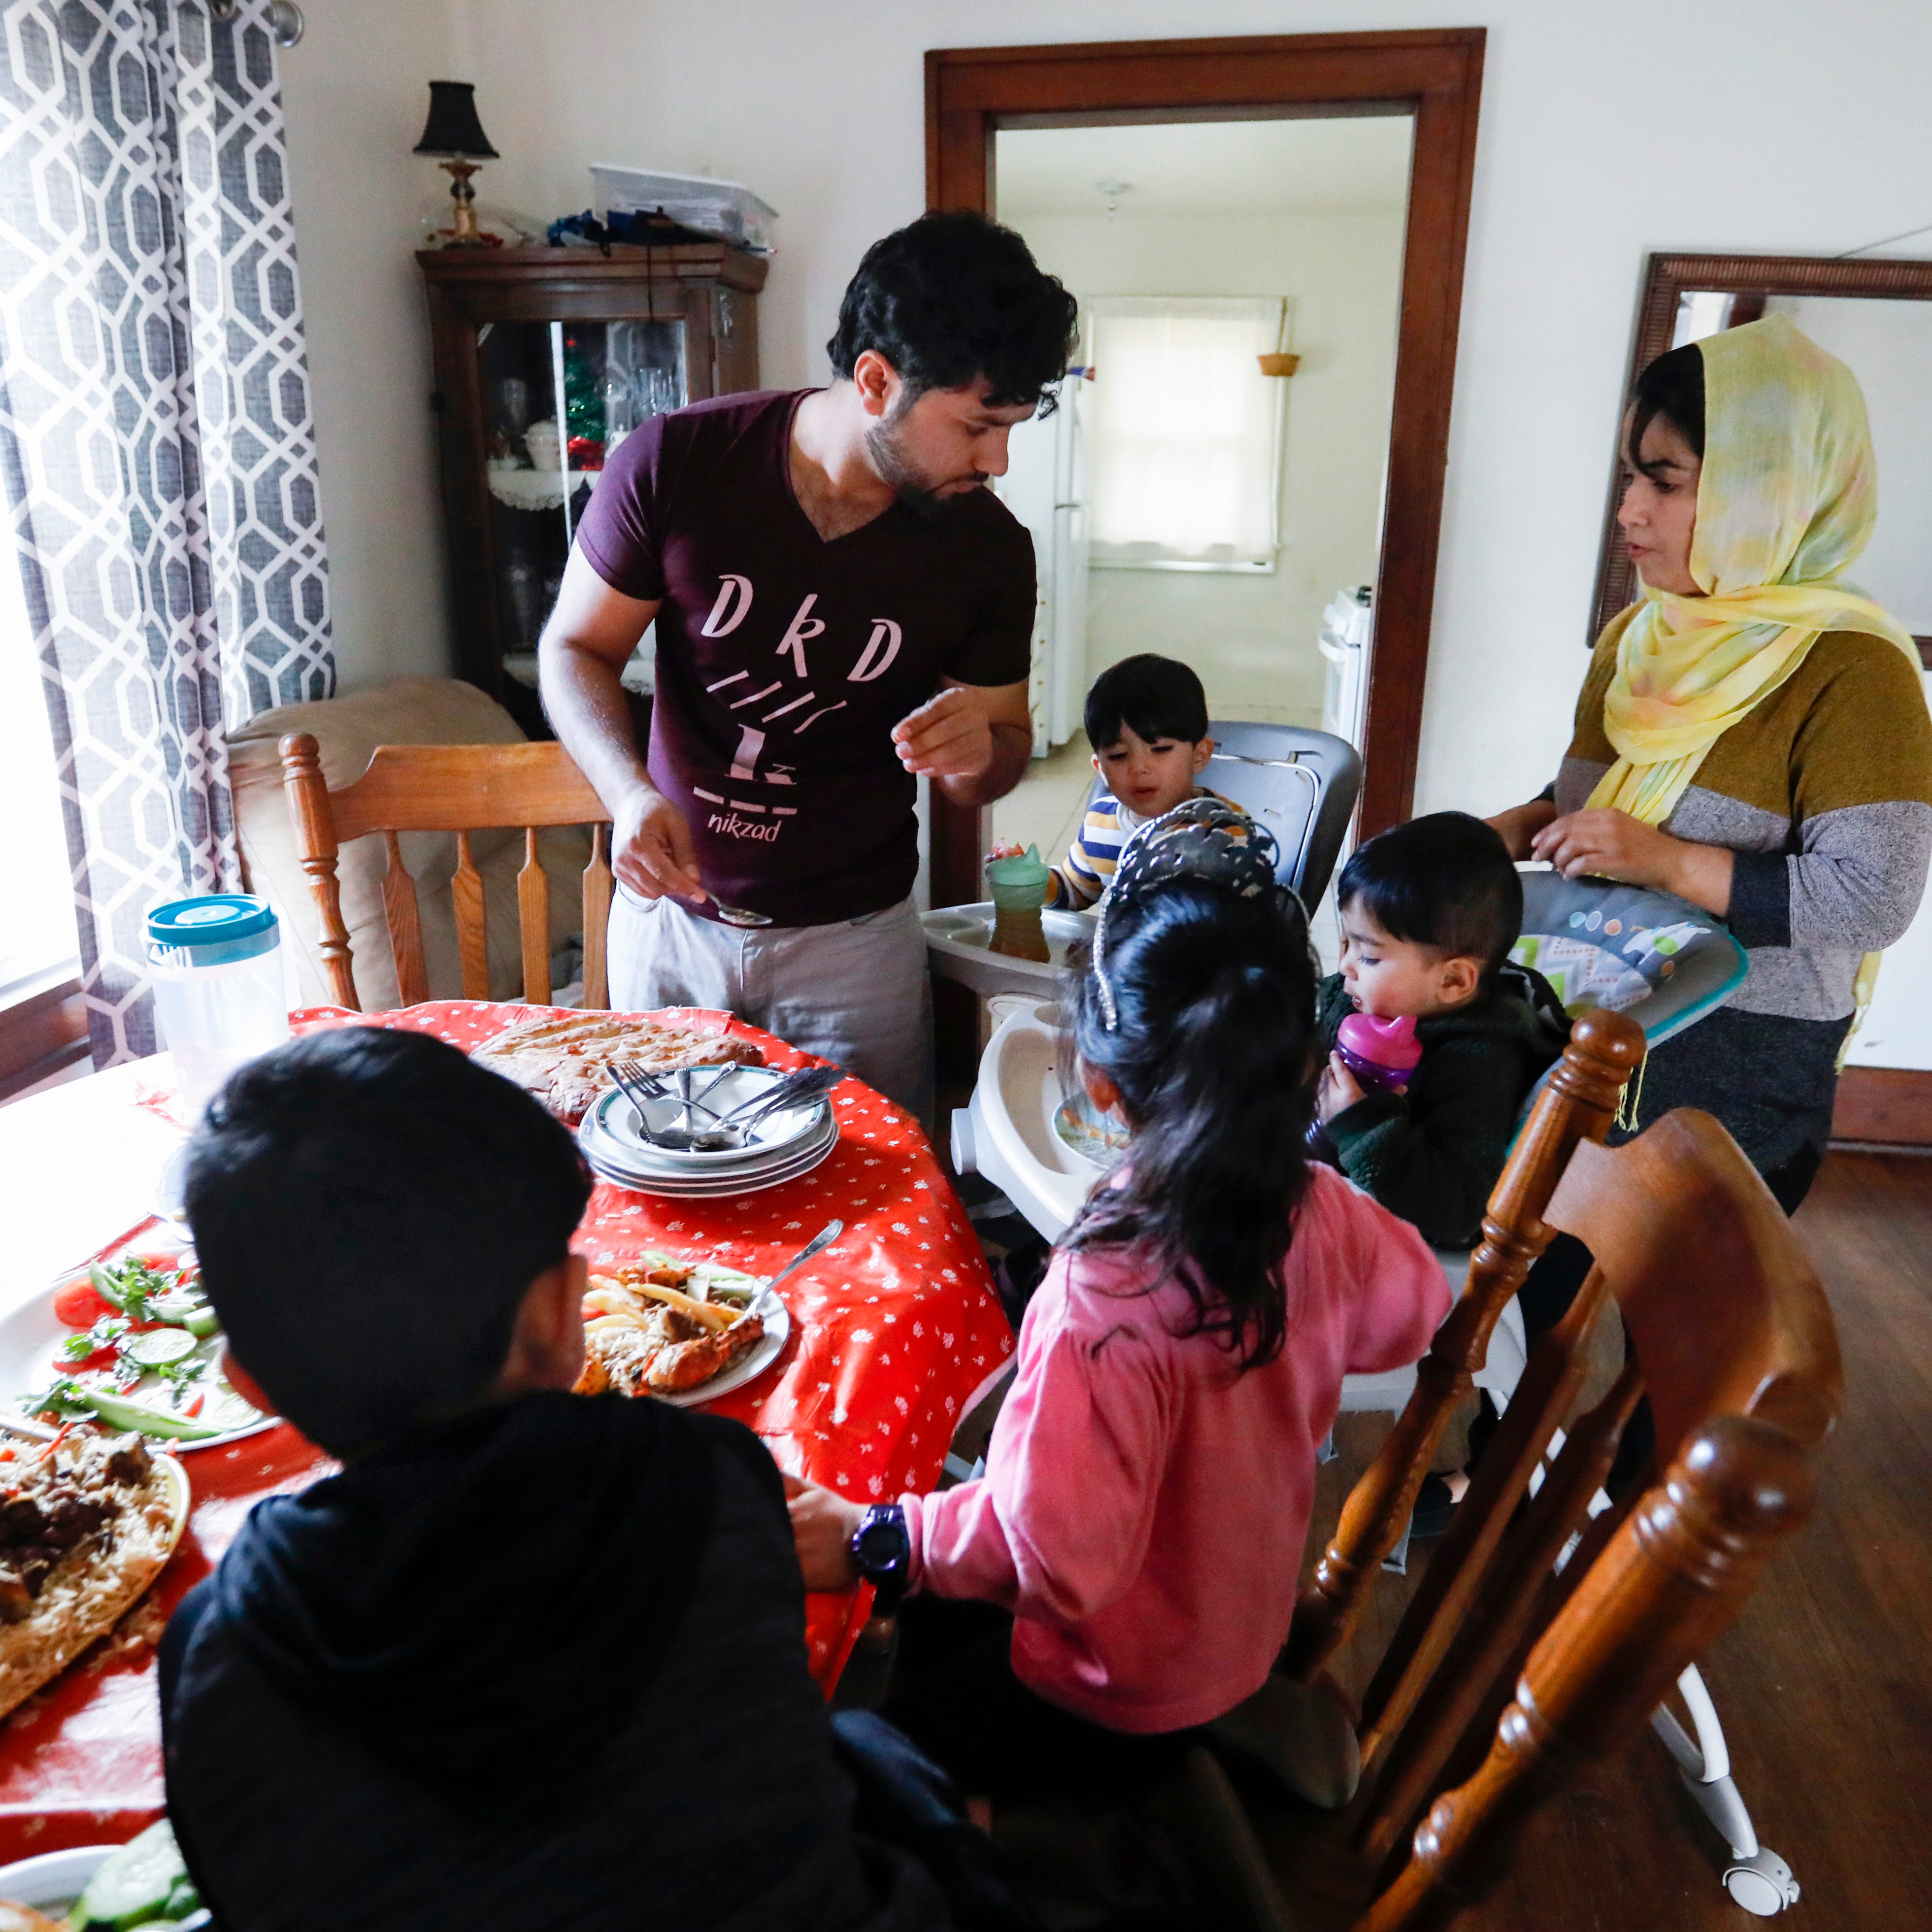 The Noori family, Romal (center), Farishta (right), 2-year-old Mohammad Sodais (back center), 18-month-old Mohammad Sorosh (middle), 6-year-old Behishta (front right), and 6-year-old Abdul Bais (front) sit down for lunch at their home on Saturday, Dec. 17, 2022. Romal Noori worked as a translator for the U.S. military for almost a decade and fled Afghanistan with his family last fall as U.S. troops withdrew and the Taliban took over.